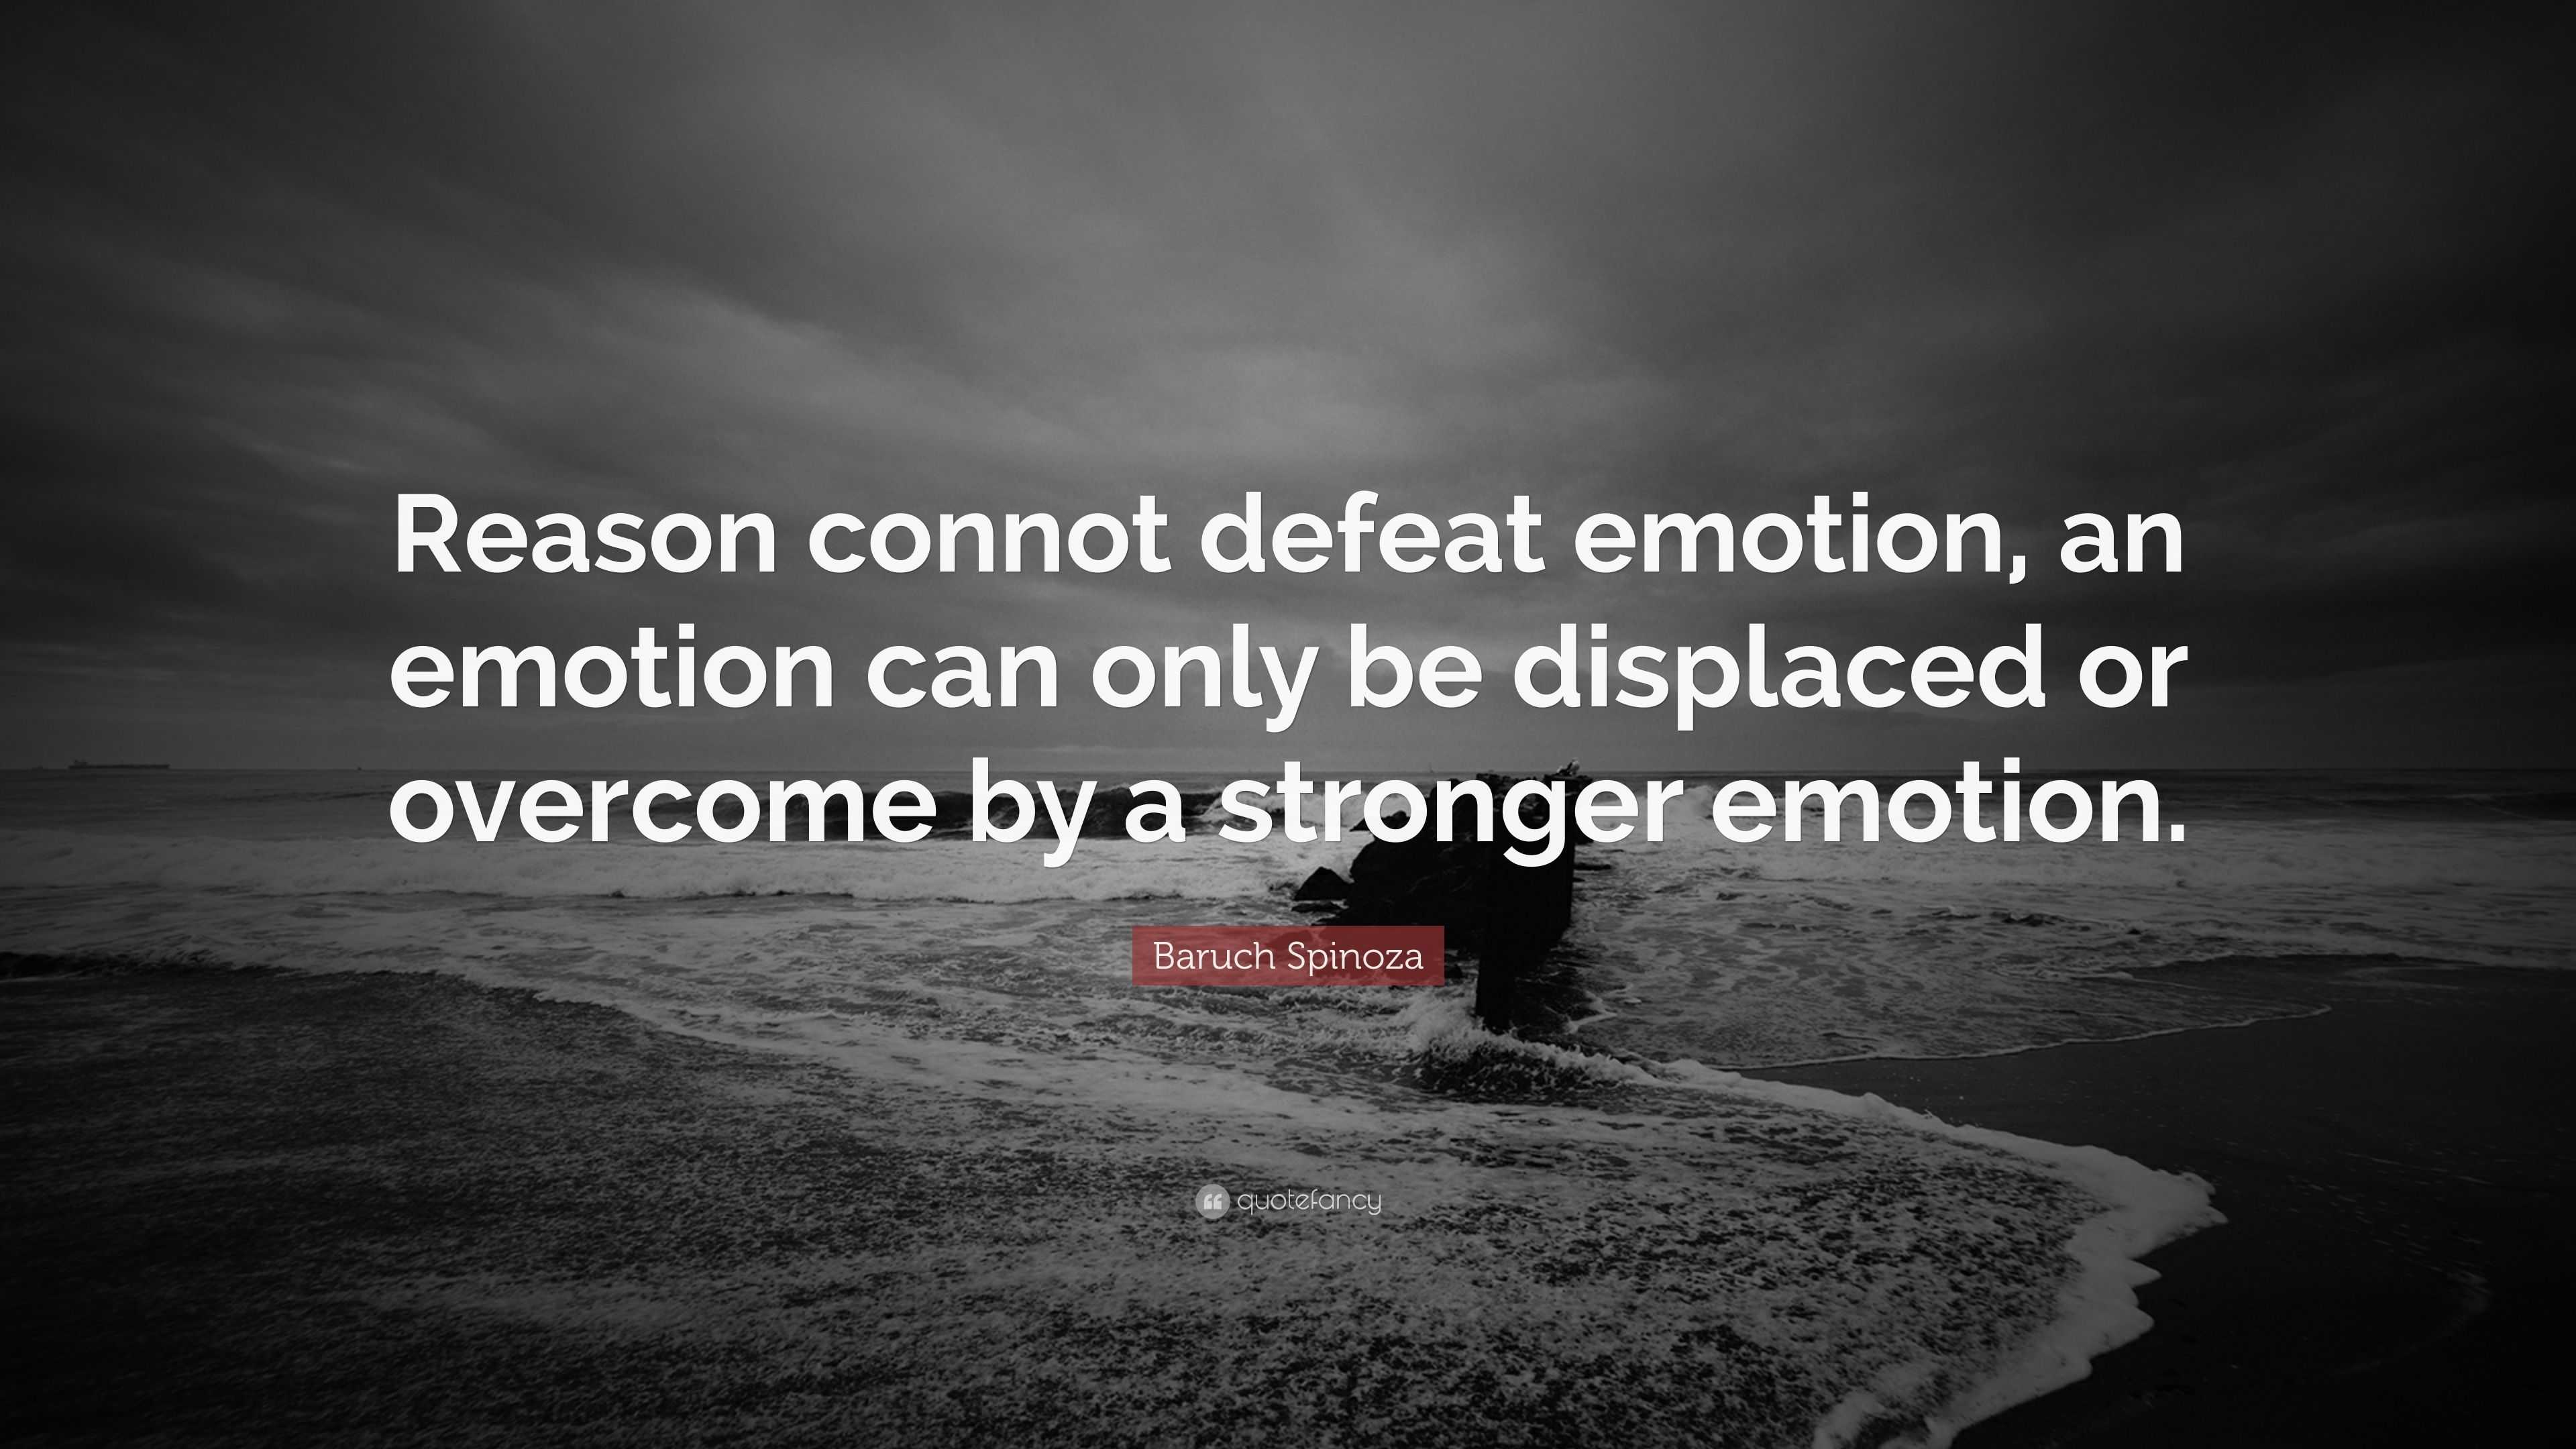 Baruch Spinoza Quote: “Reason connot defeat emotion, an emotion can ...